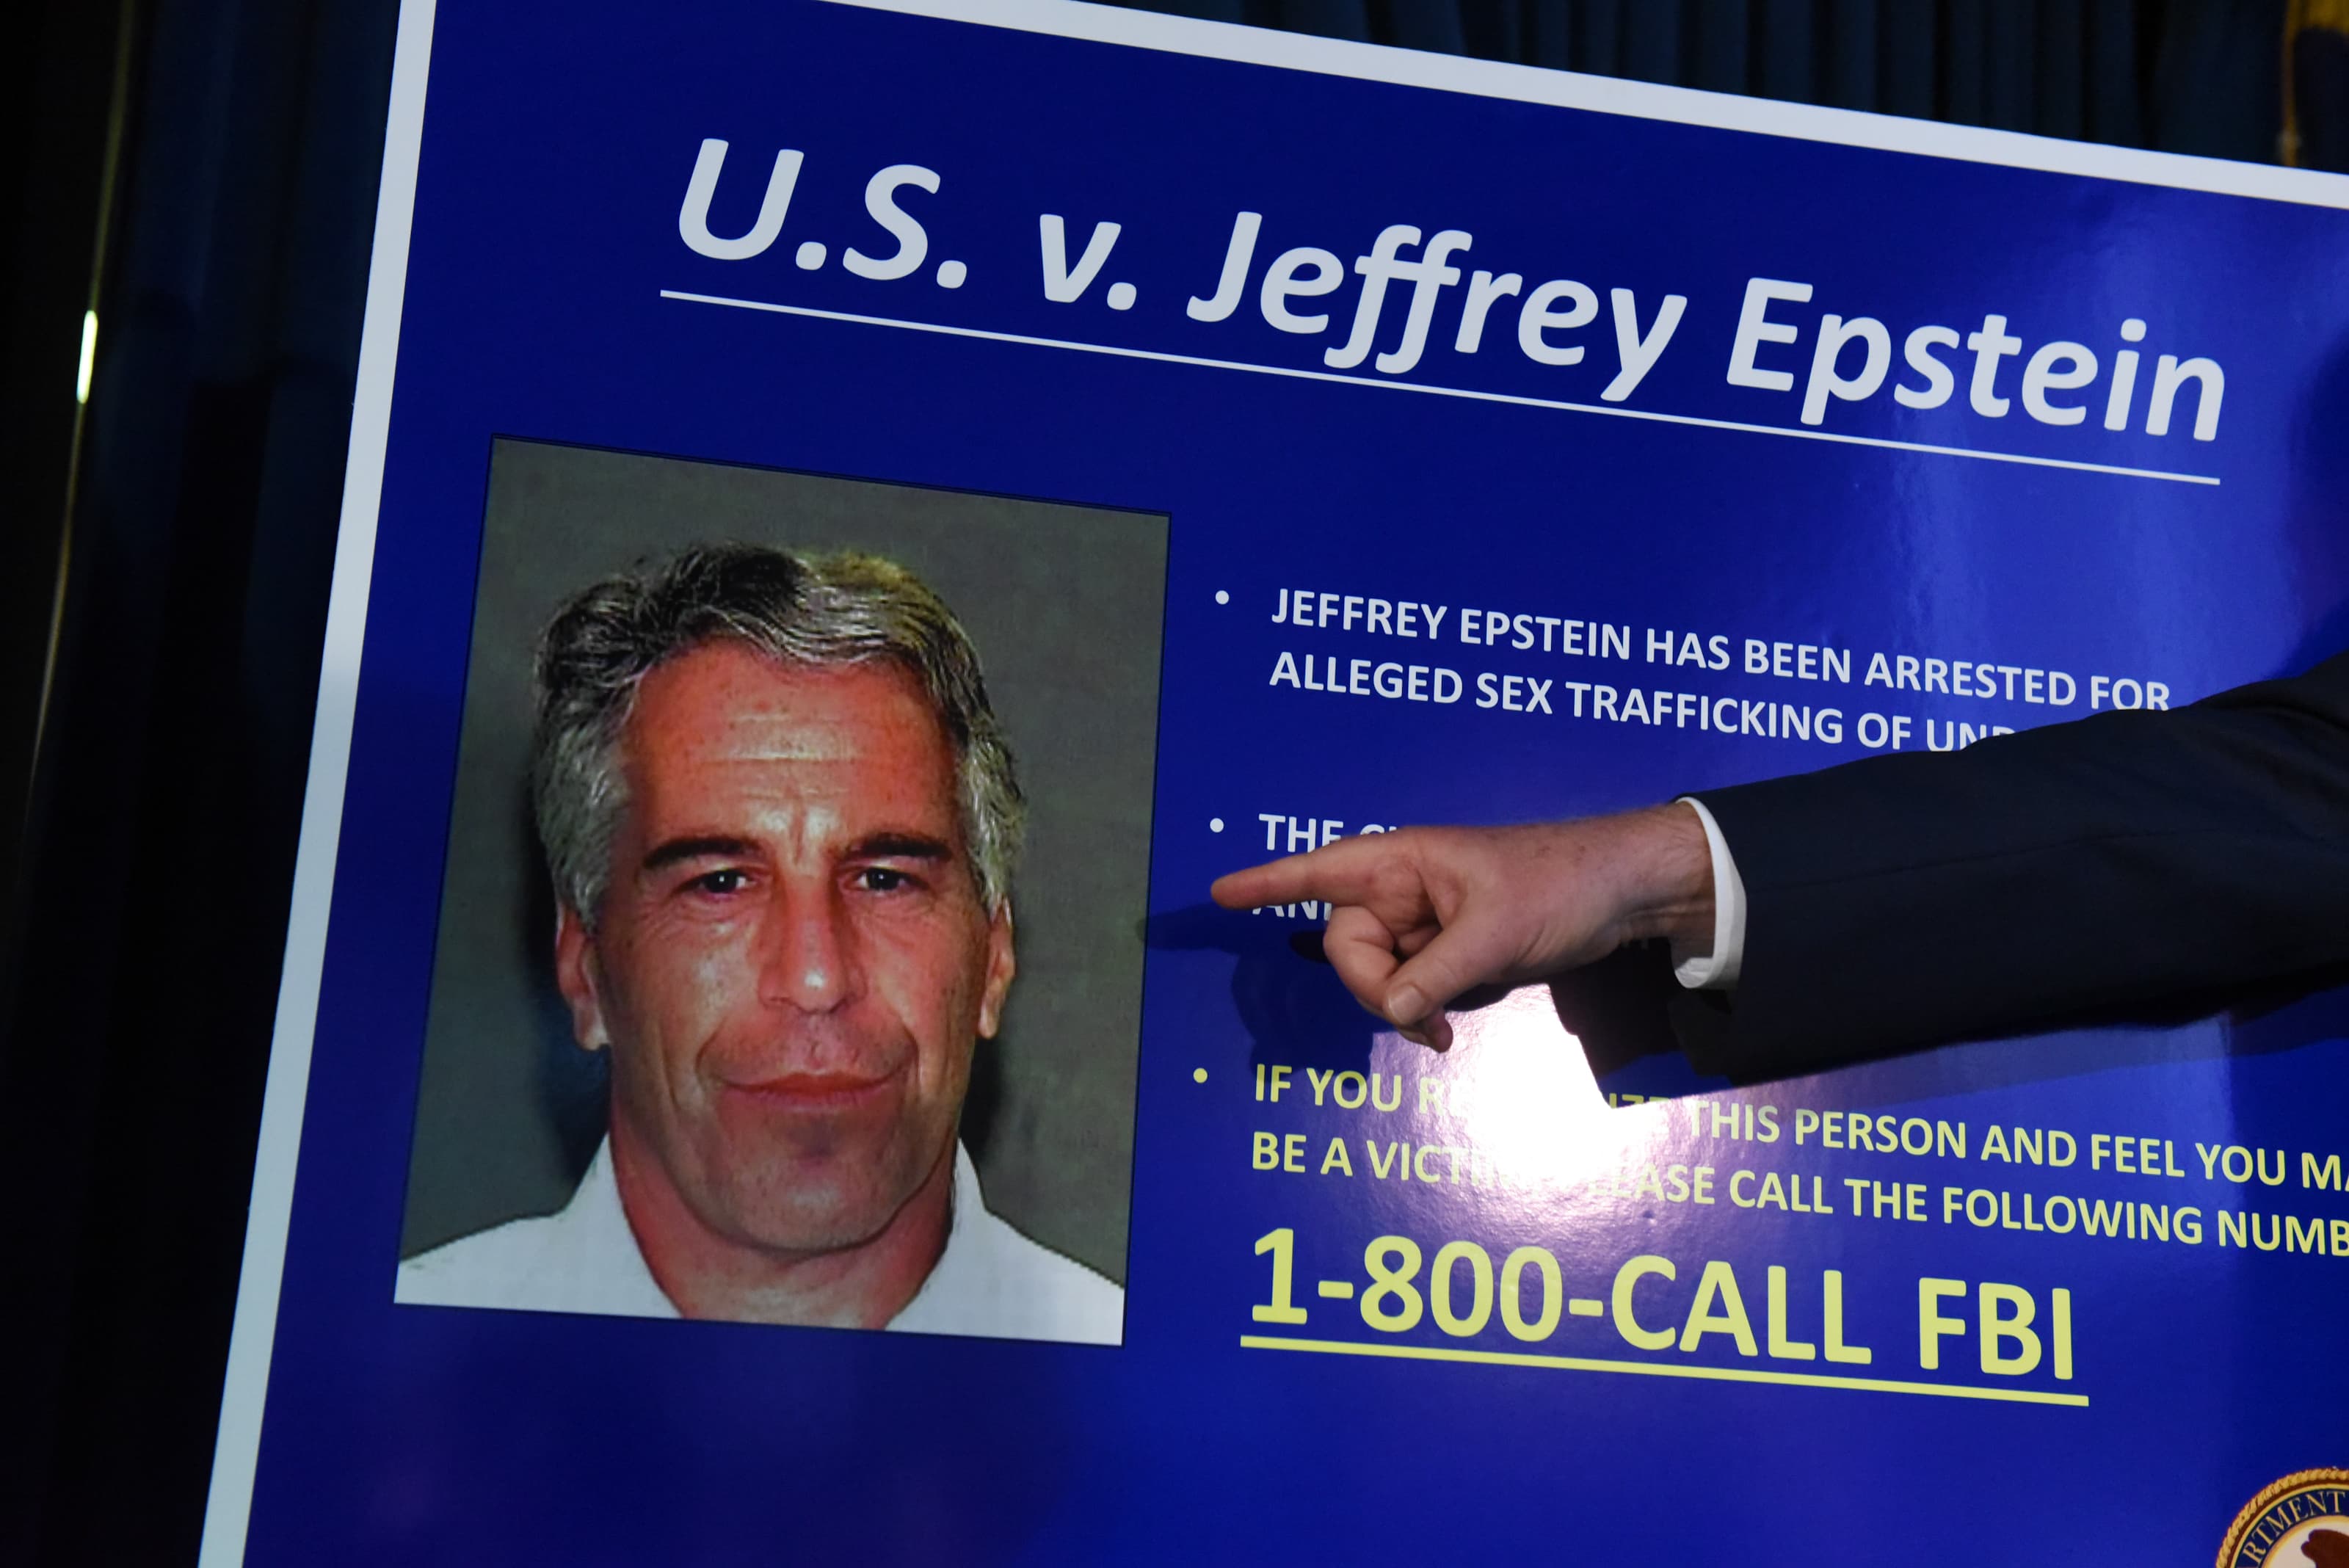 Last Batch of Epstein Documents Released